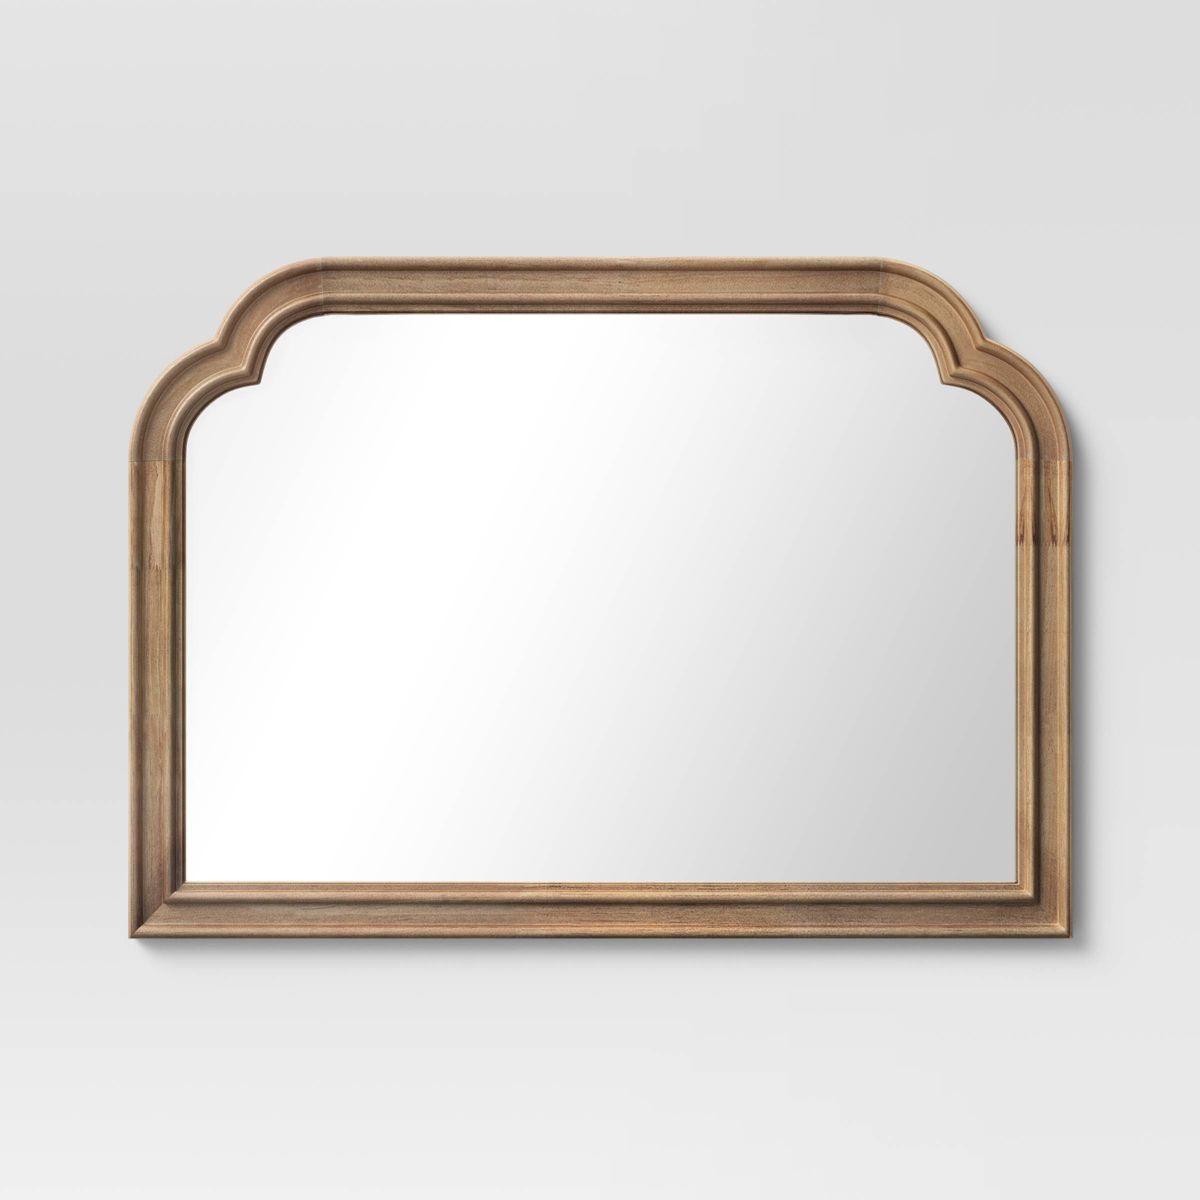 36" x 26" French Country Mantle Wood Mirror Natural - Threshold™ | Target